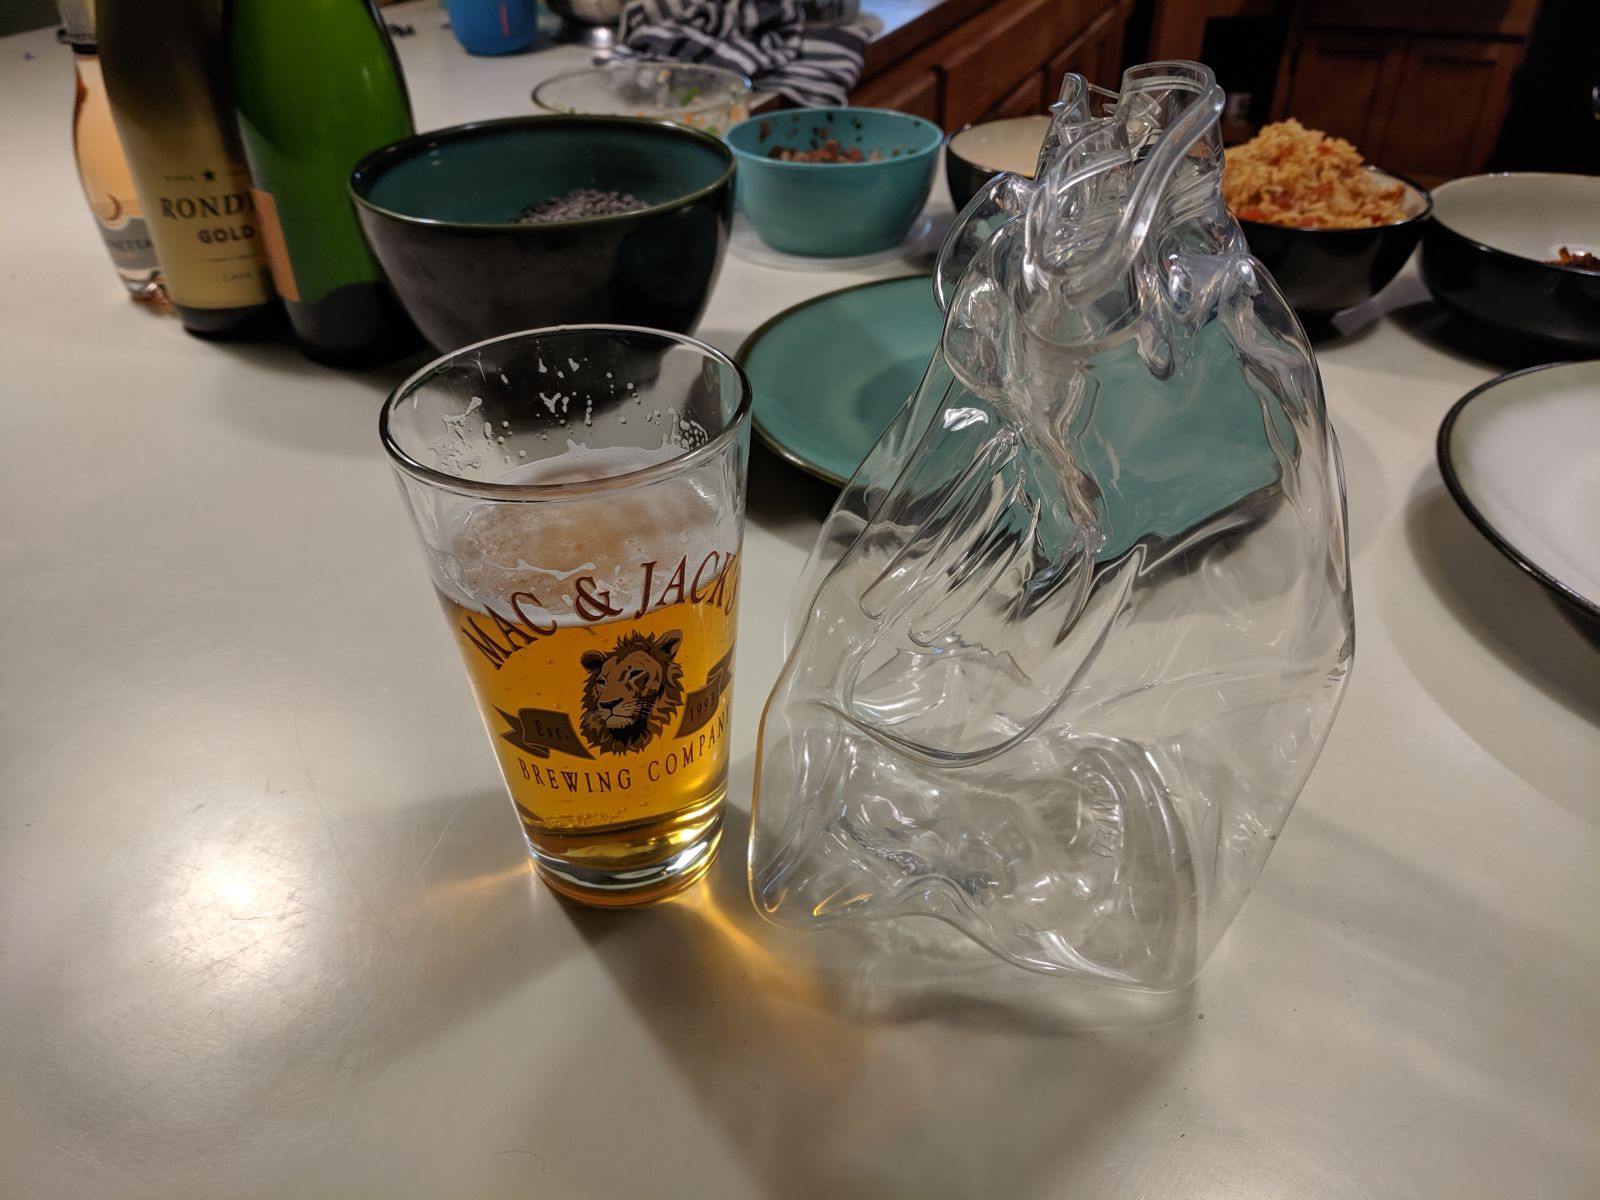 Pint glass for scale